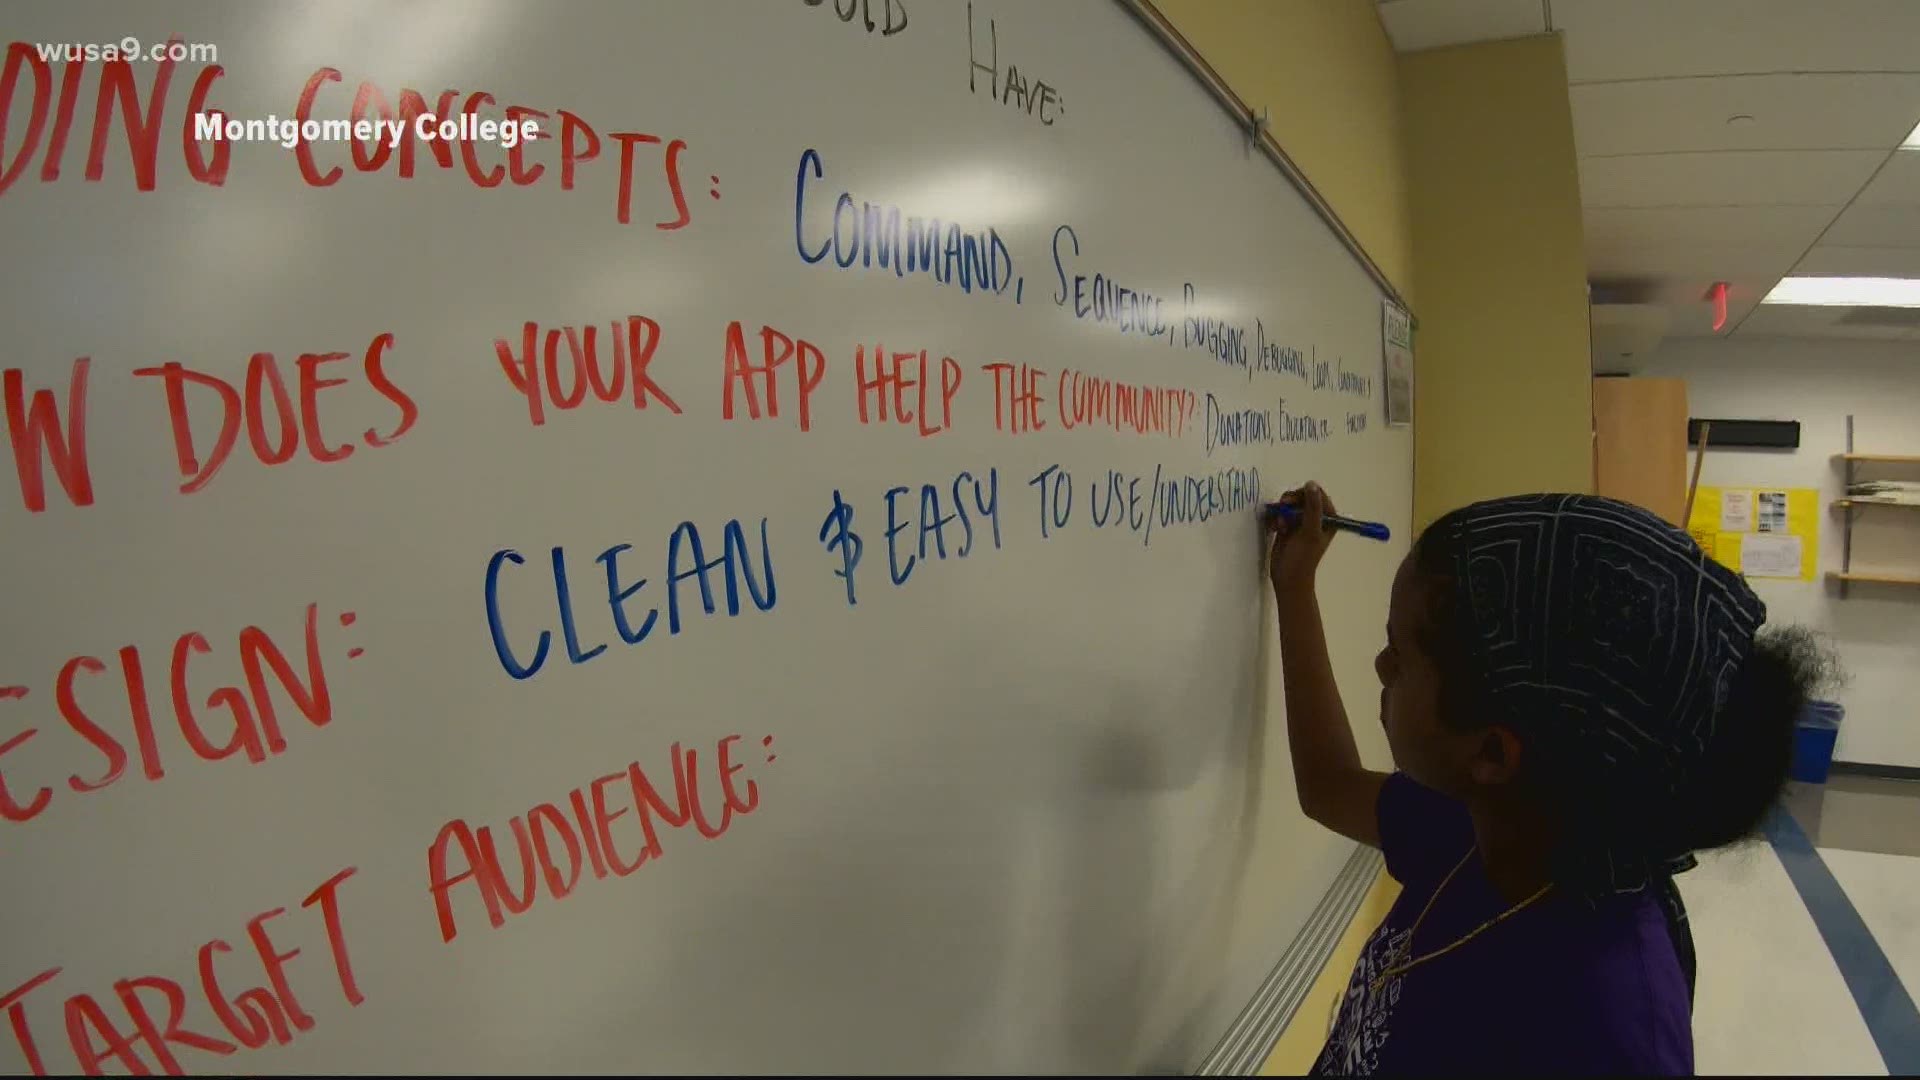 Montgomery College moved more than 200 summer camps online amid coronavirus concerns. Students nationwide have connected with the program.